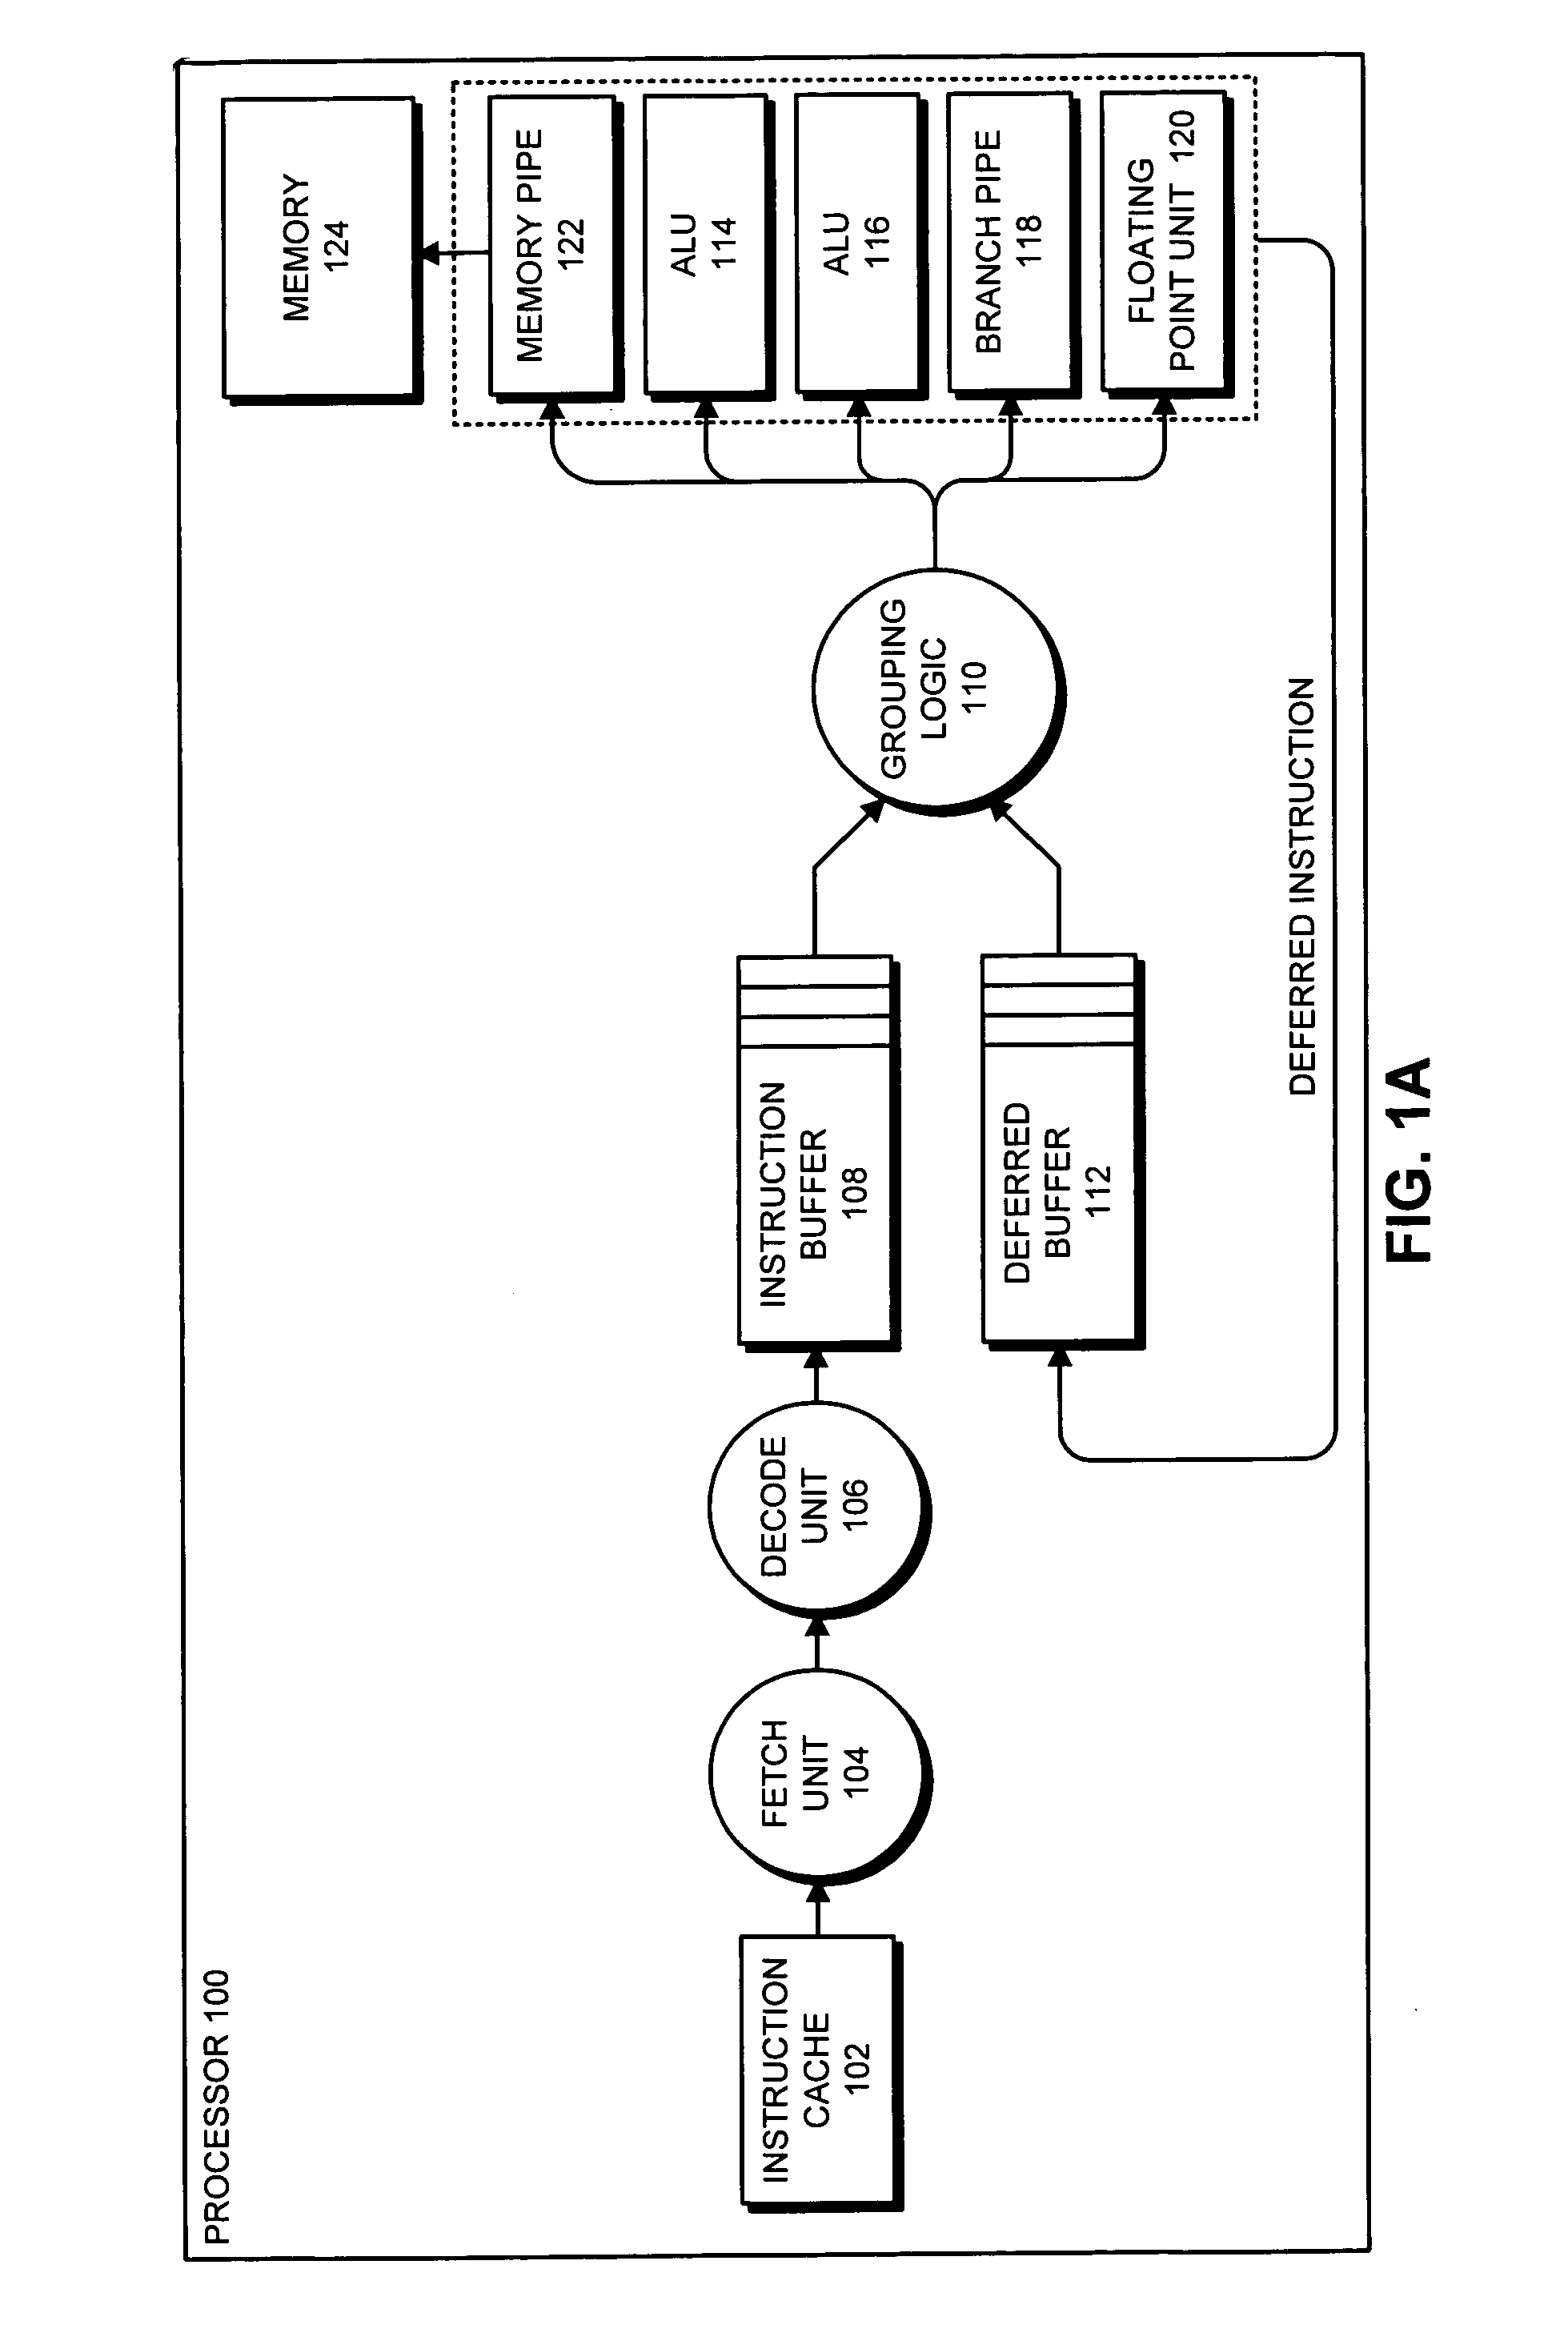 Selectively deferring instructions issued in program order utilizing a checkpoint and multiple deferral scheme